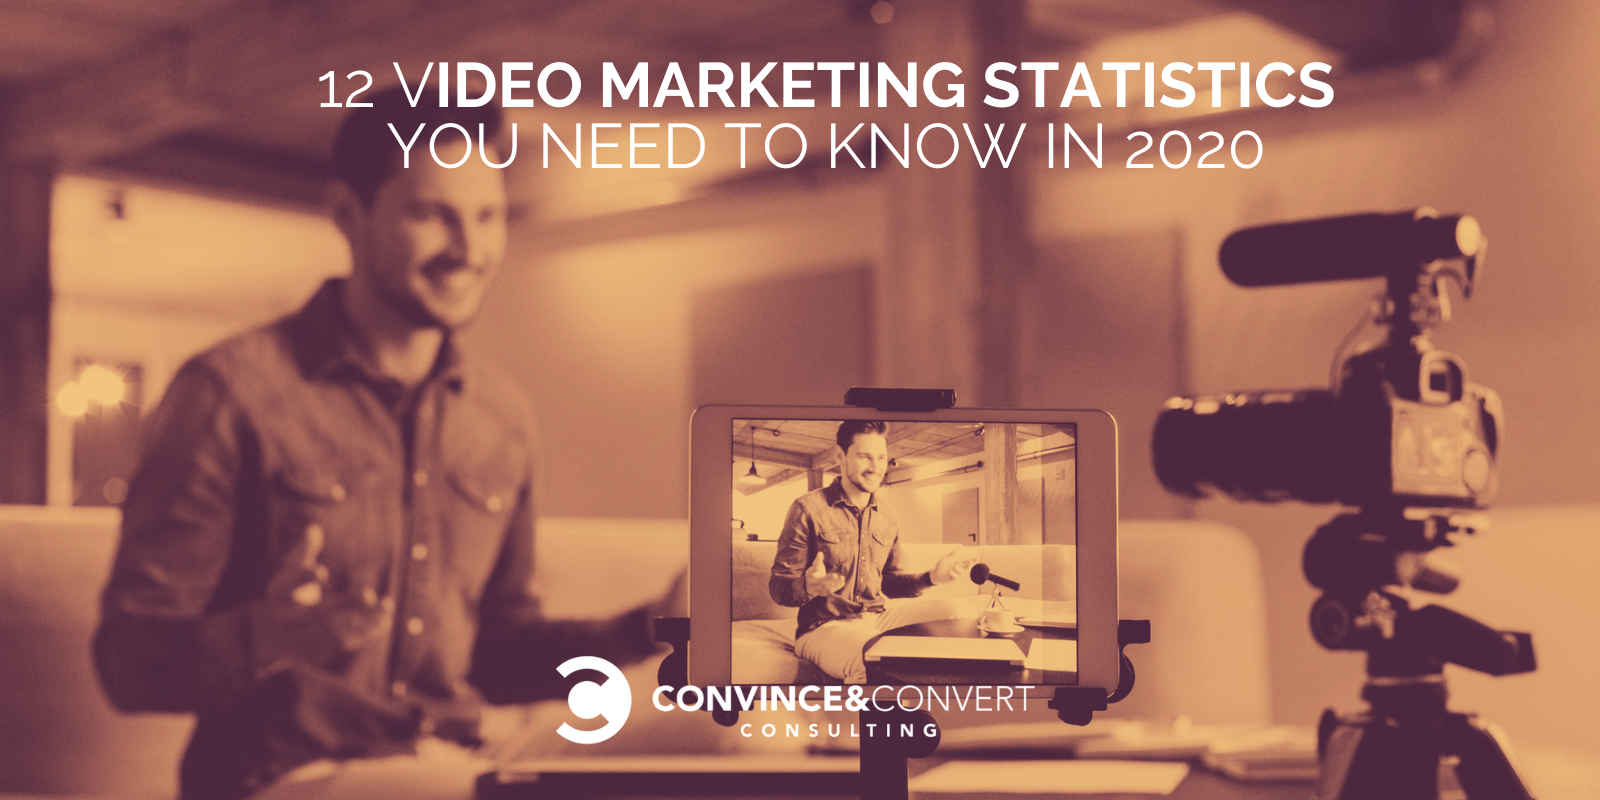 12 Video Marketing Statistics You Need to Know in 2020